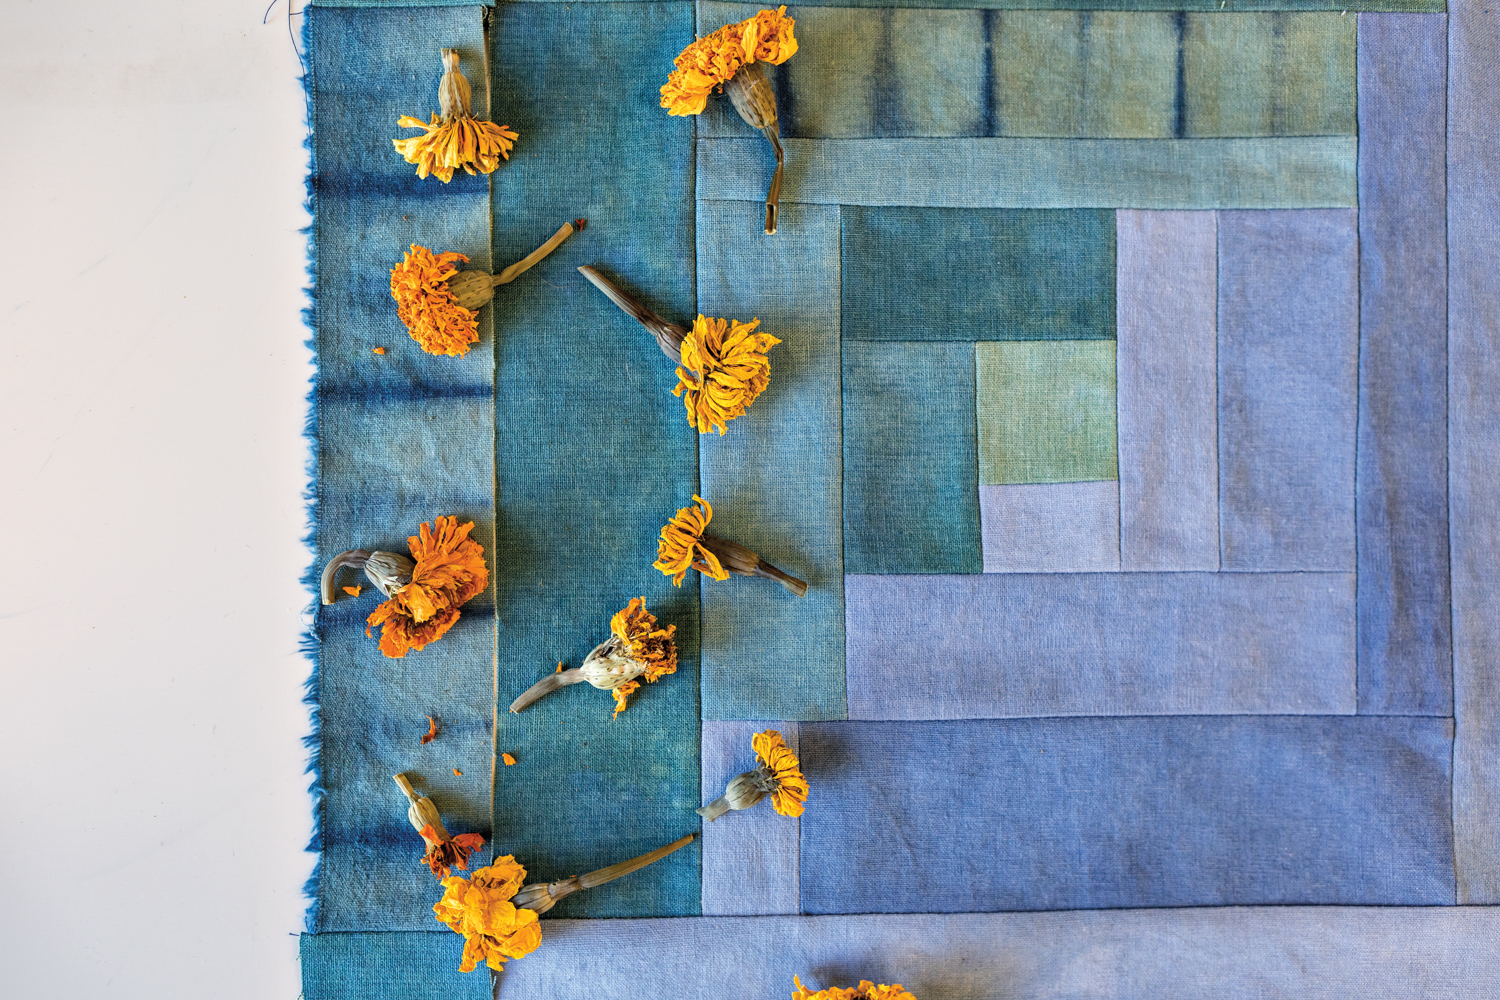 marigolds sit atop a quilted square